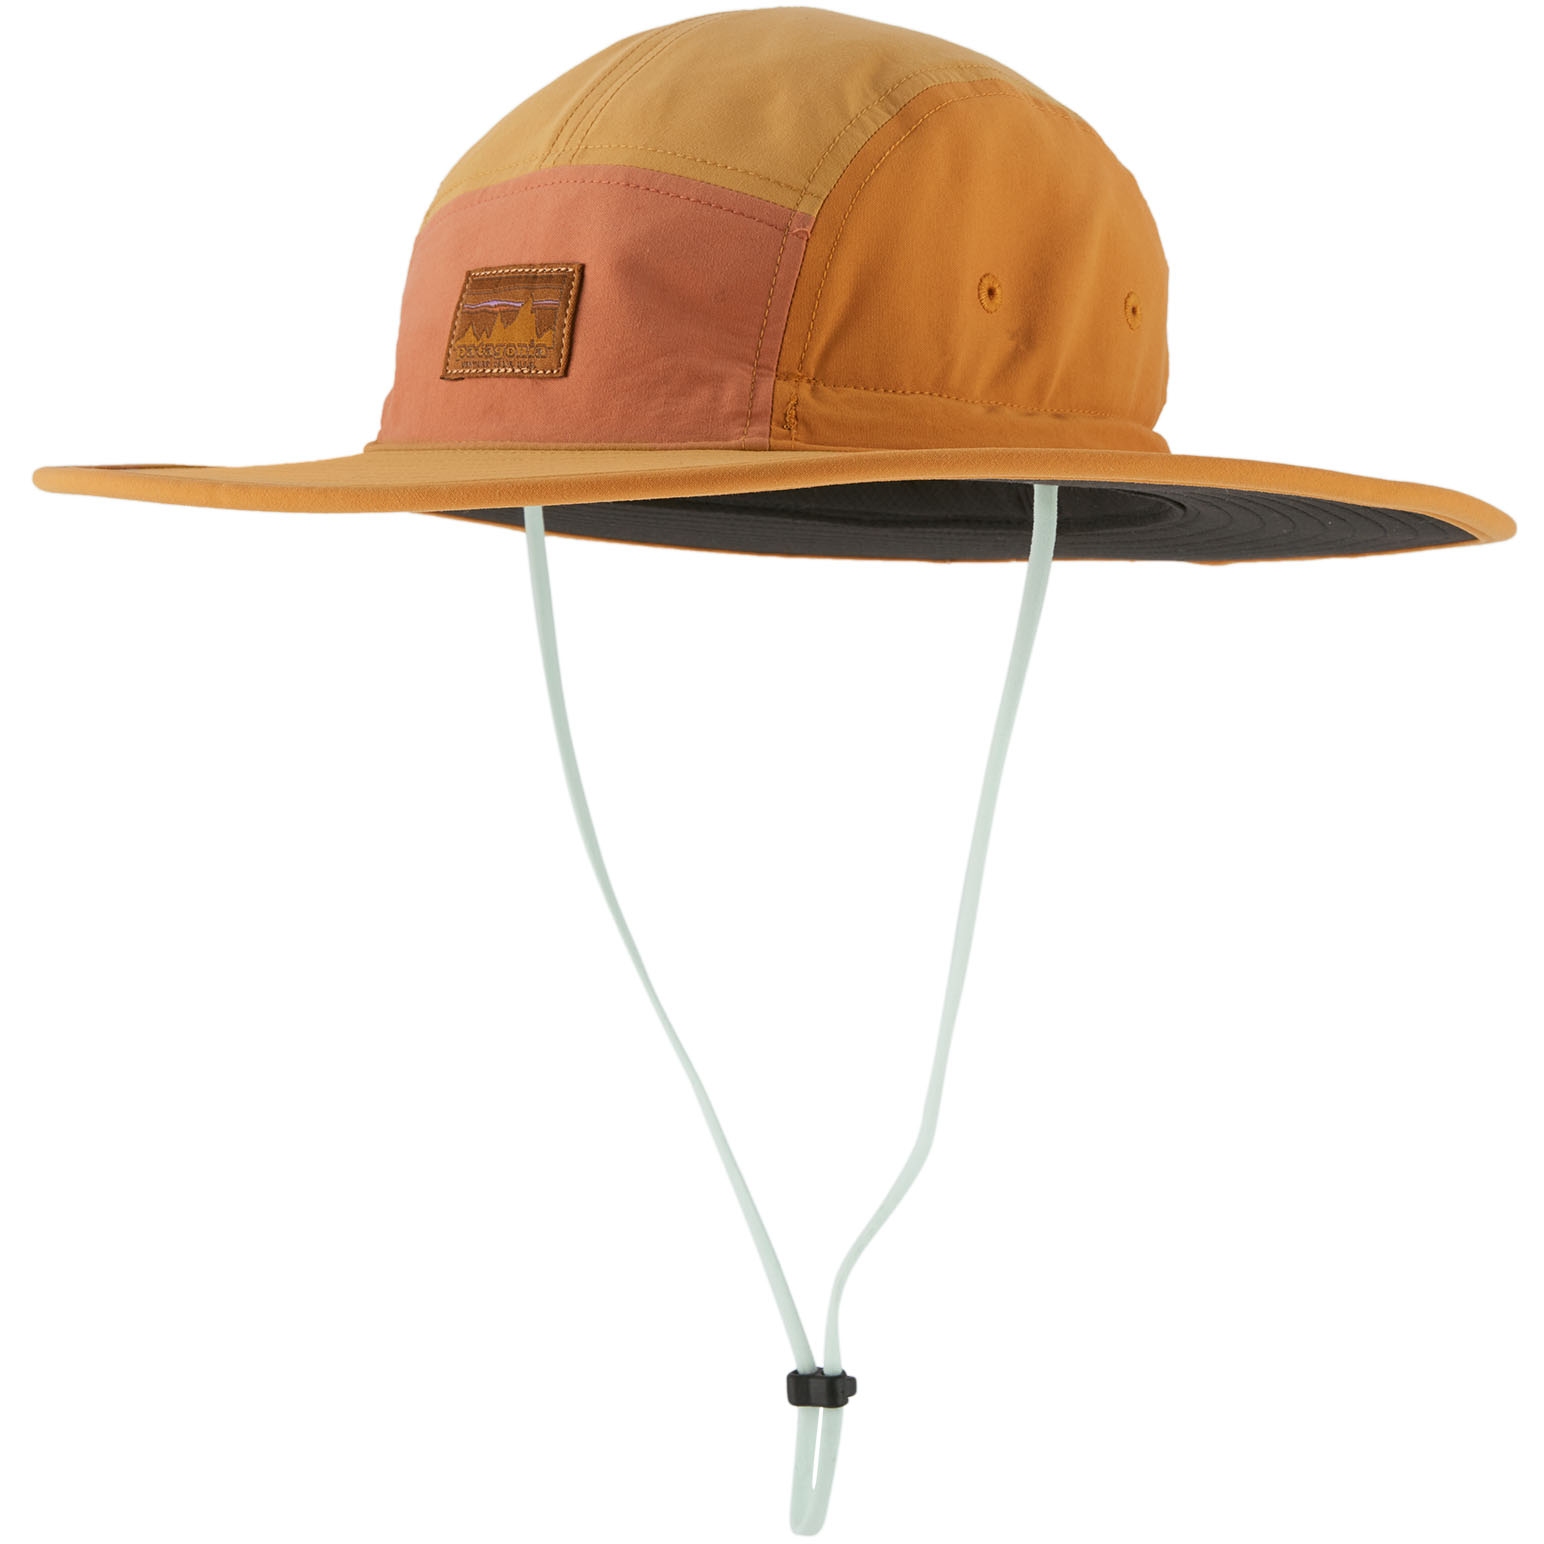 Patagonia Quandary Brimmer Hat - 73 Skyline: Sienna Clay